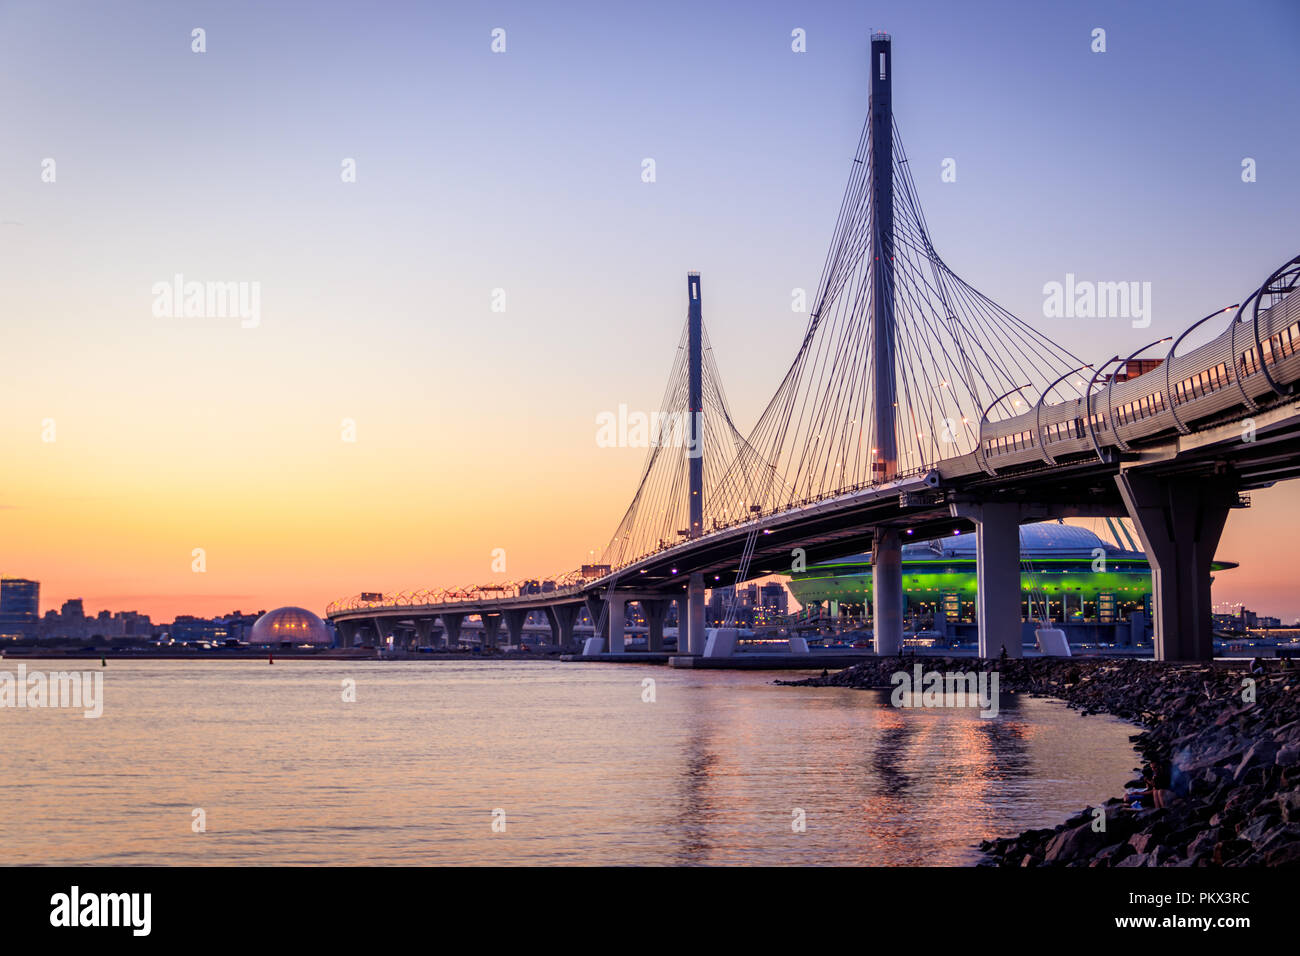 WHSD bridge in St. Petersburg in the evening at sunset. High-speed bypass toll road. Russia, Saint-Petersburg. Petersburg bridges. New modern bridge.  Stock Photo